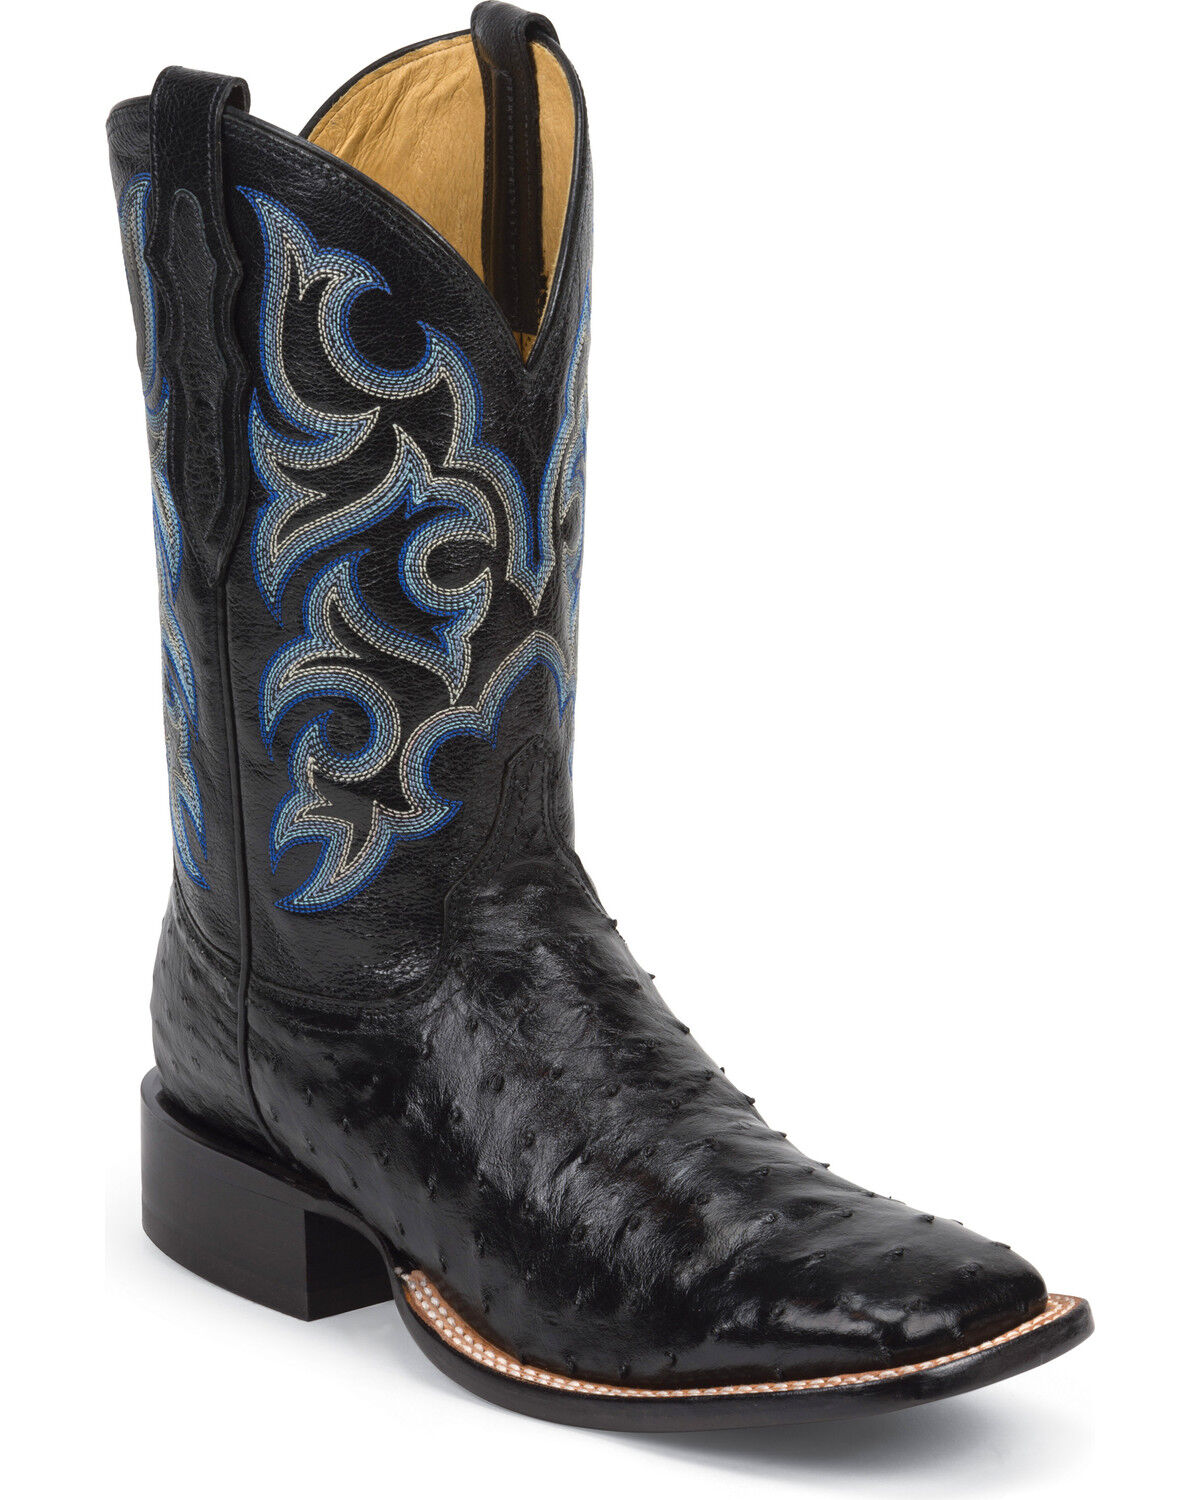 taos boots womens